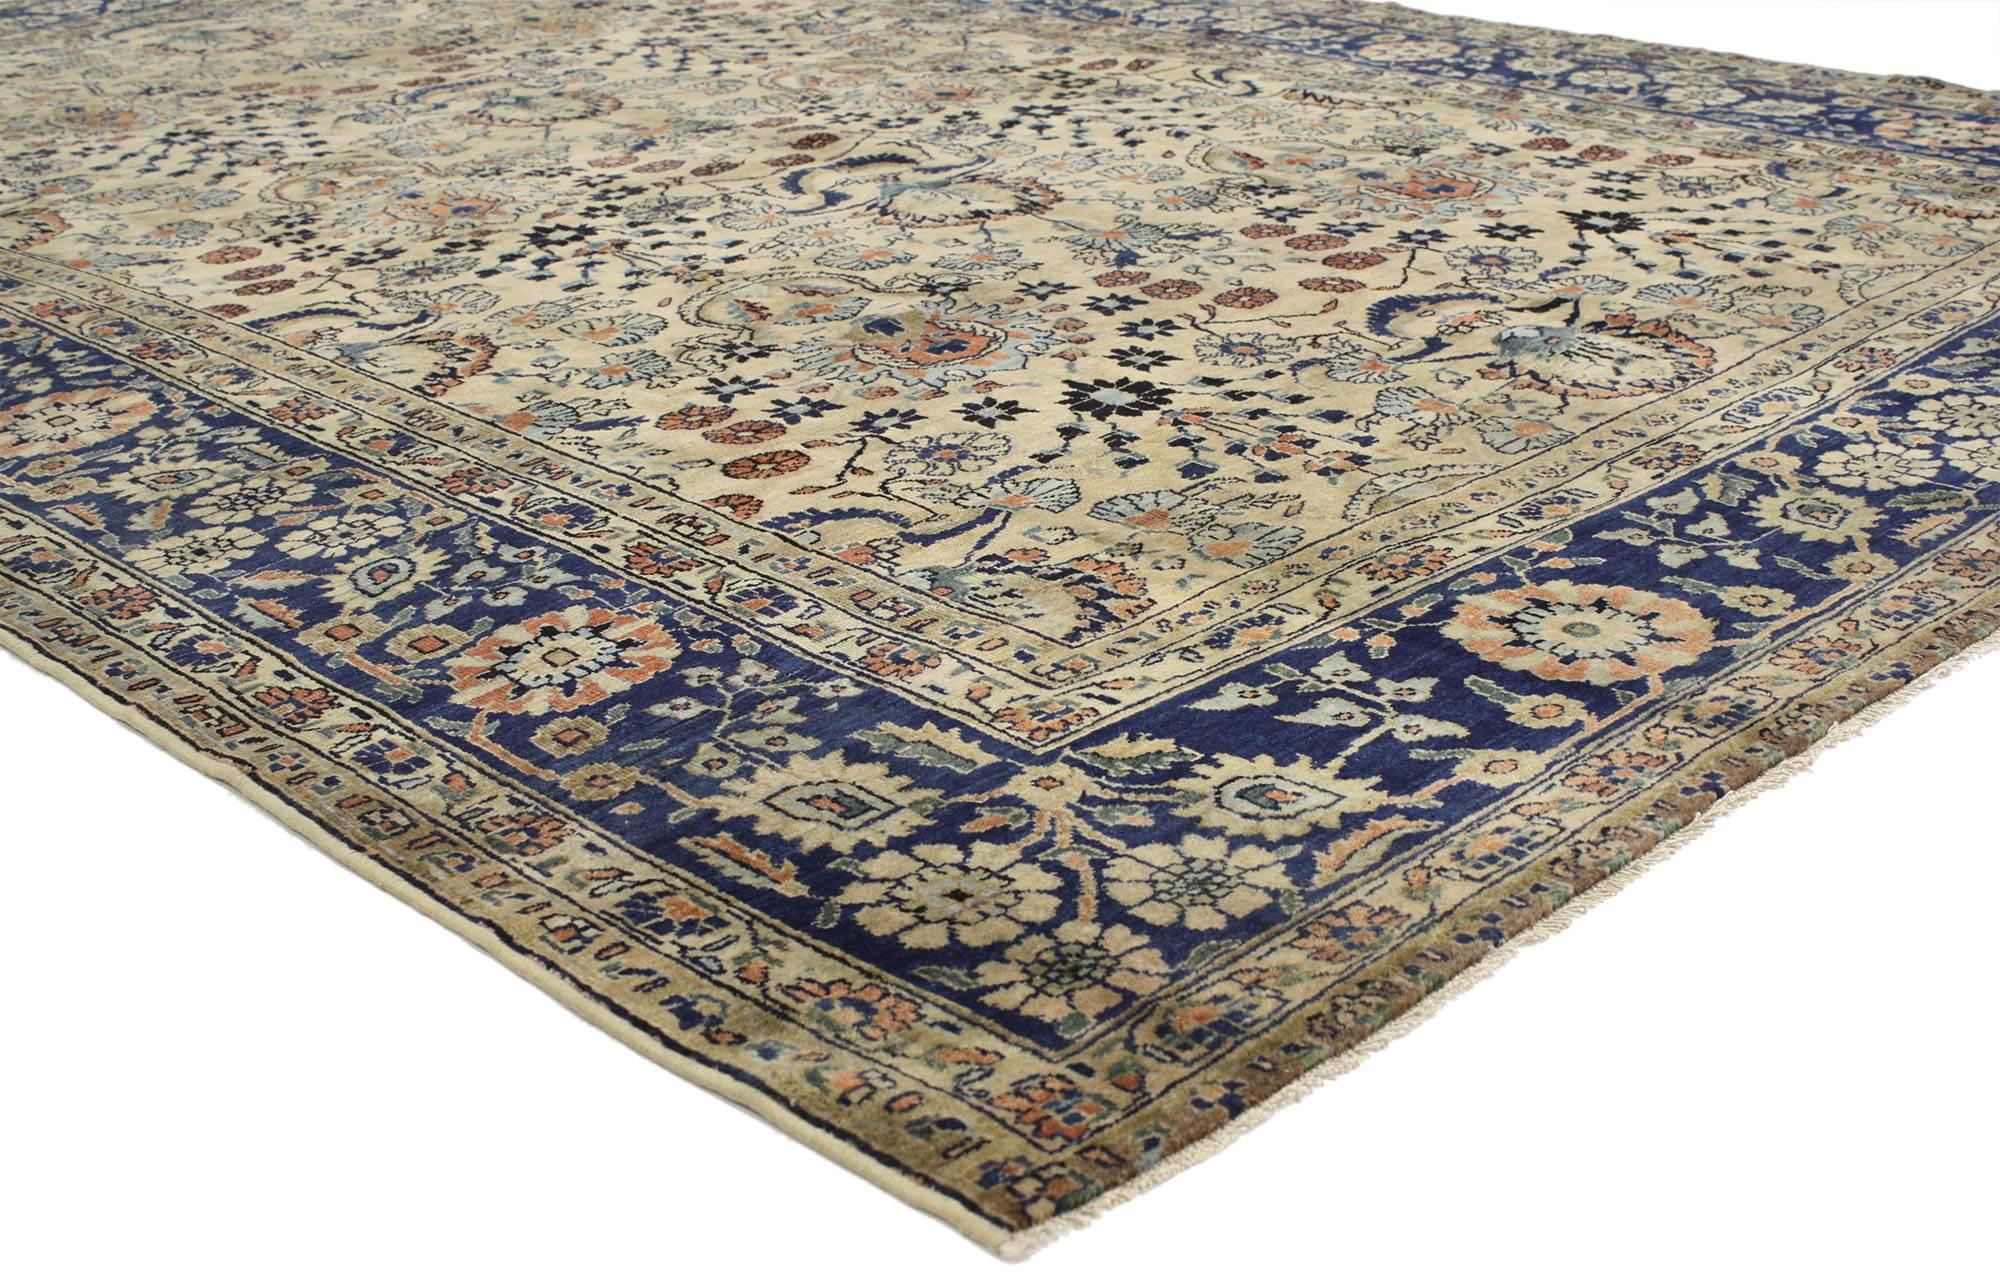 52259 Antique Persian Sarouk Rug with Italian Country Cottage Style 06'07 x 09'09. With brilliant blues and warm terracotta hues inspired by Italy, this hand knotted wool antique Persian Sarouk rug beautifully embodies an Italian Country Cottage